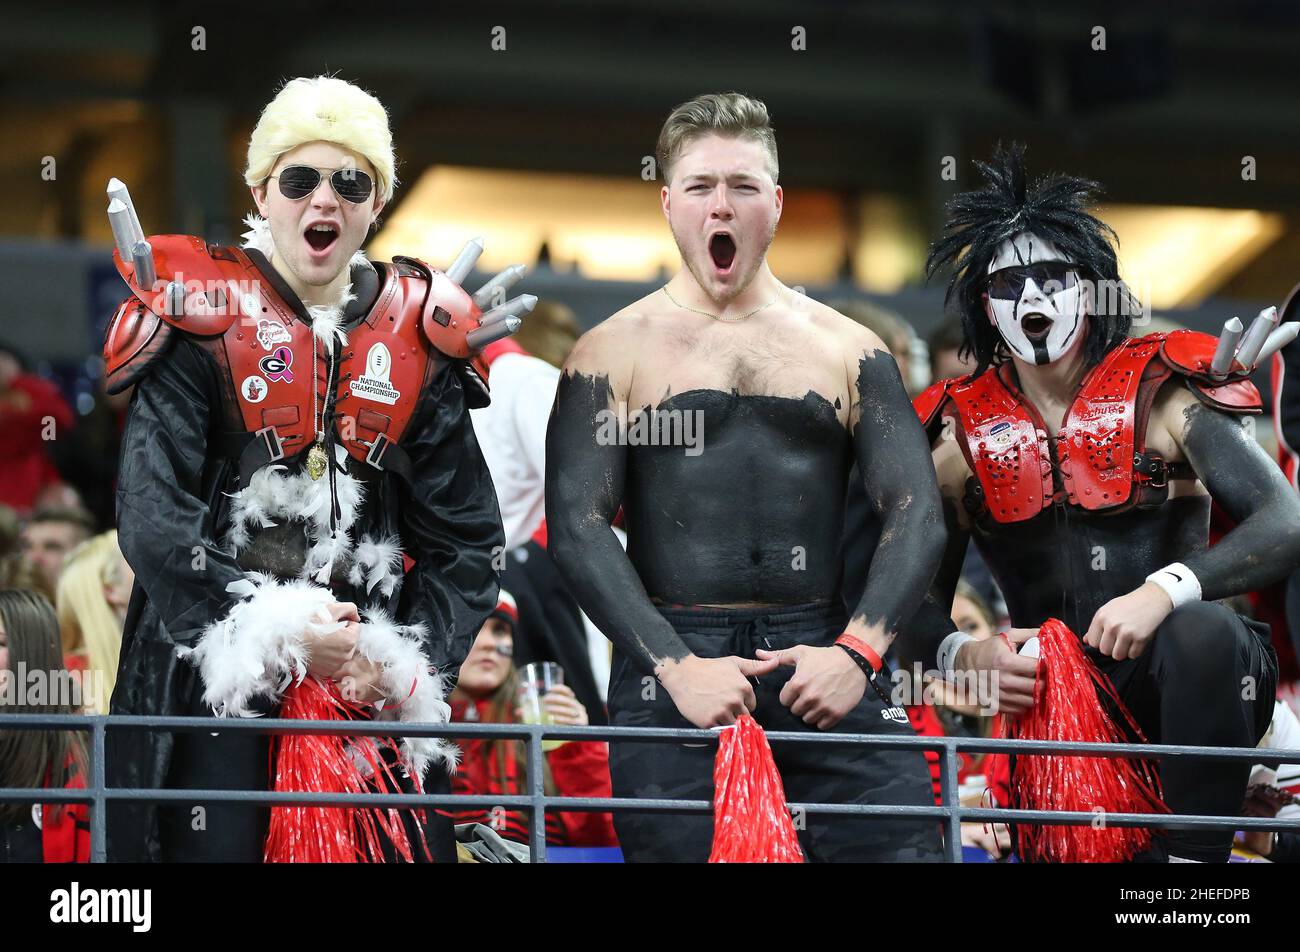 Indianapolis, United States. 10th Jan, 2022. Georgia Bulldogs fans prepare to face the Alabama Crimson Tide during the 2022 NCAA National Championship football game at Lucas Oil Stadium in Indianapolis, Indiana, on Monday, January 10, 2022. Photo by Aaron Josefczyk/UPI Credit: UPI/Alamy Live News Stock Photo